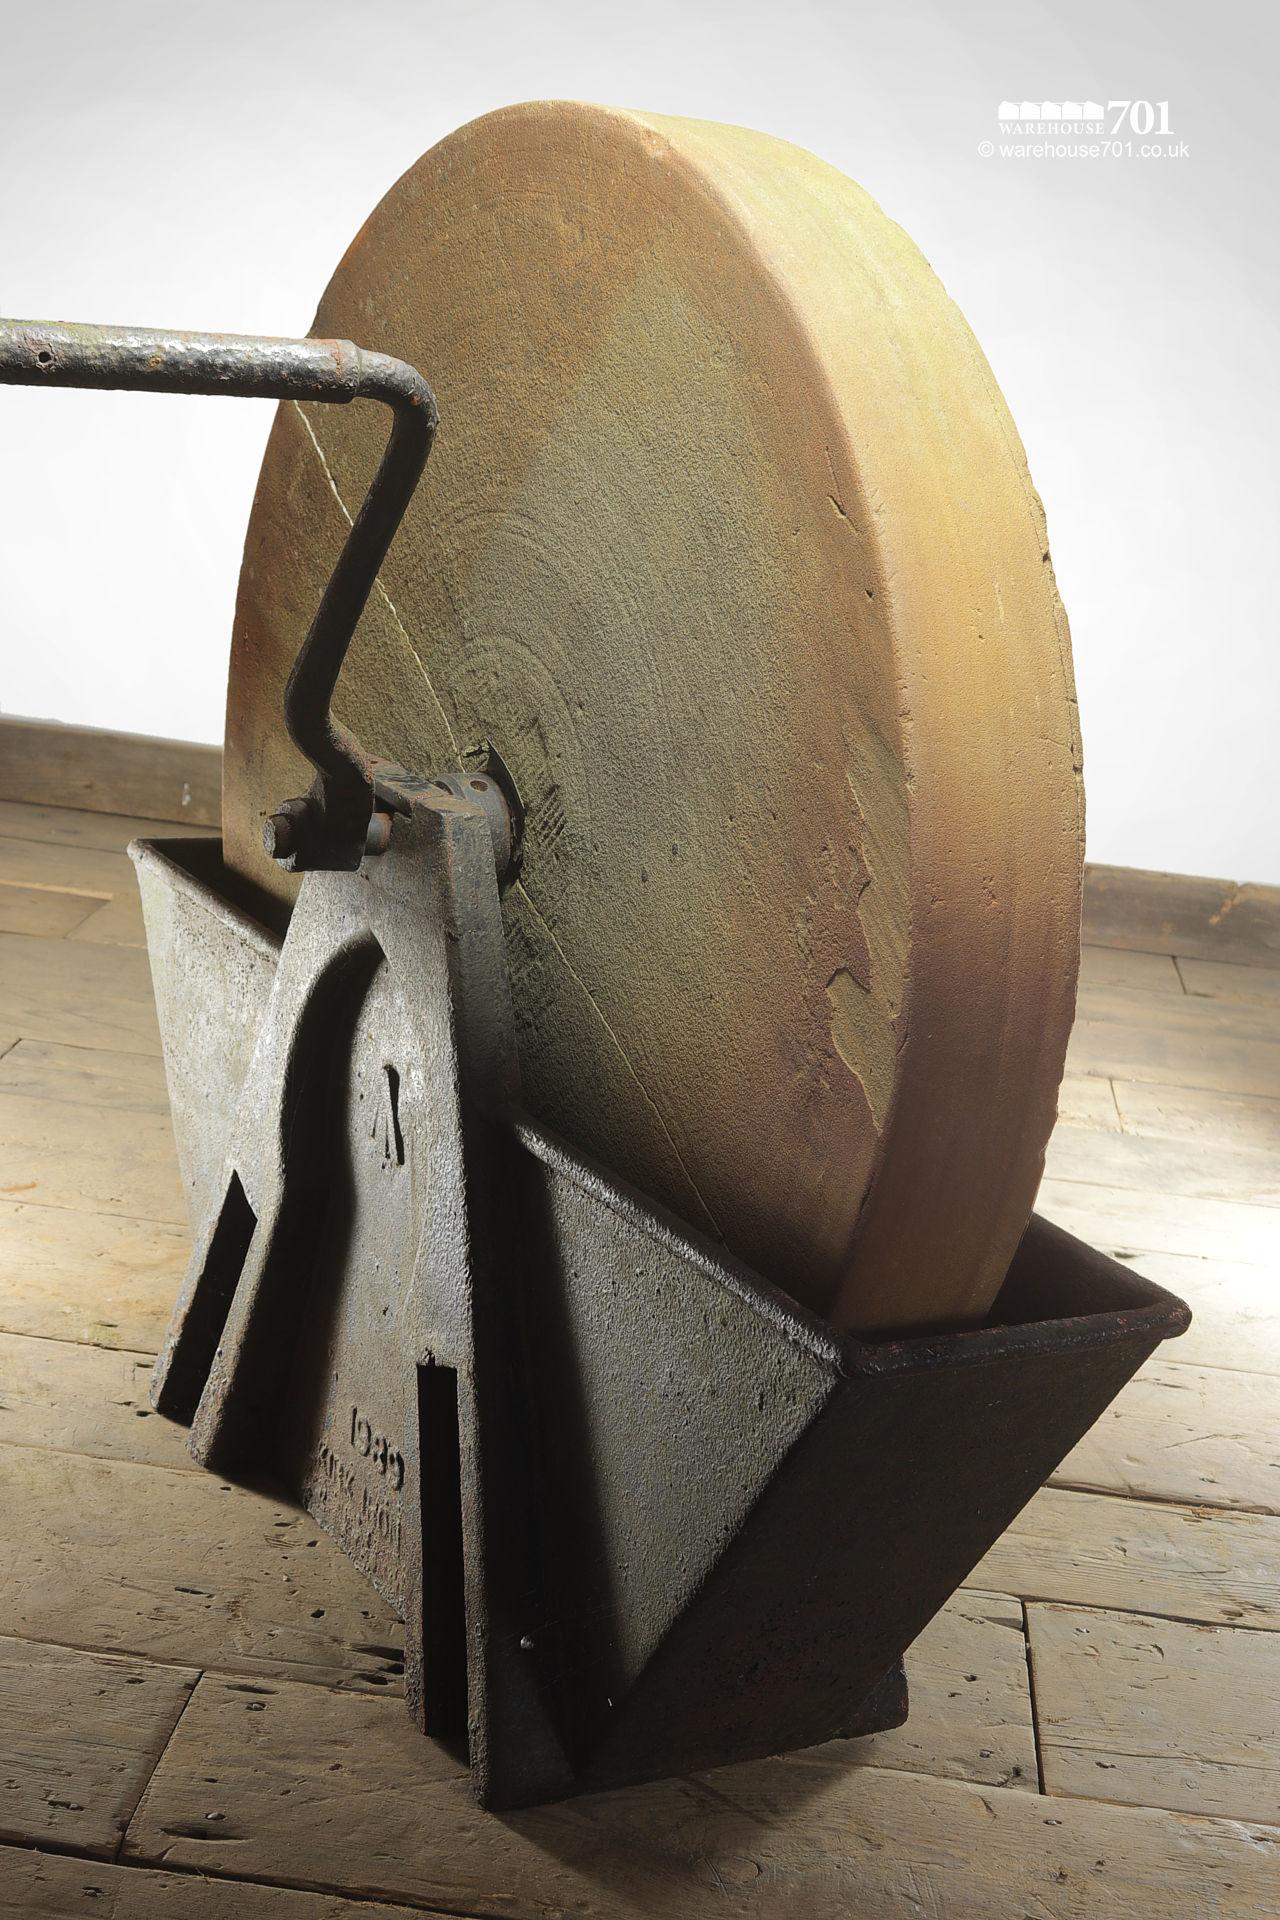 Large Old Wet Stone or Sharpening Wheel with Crank Handle and Iron